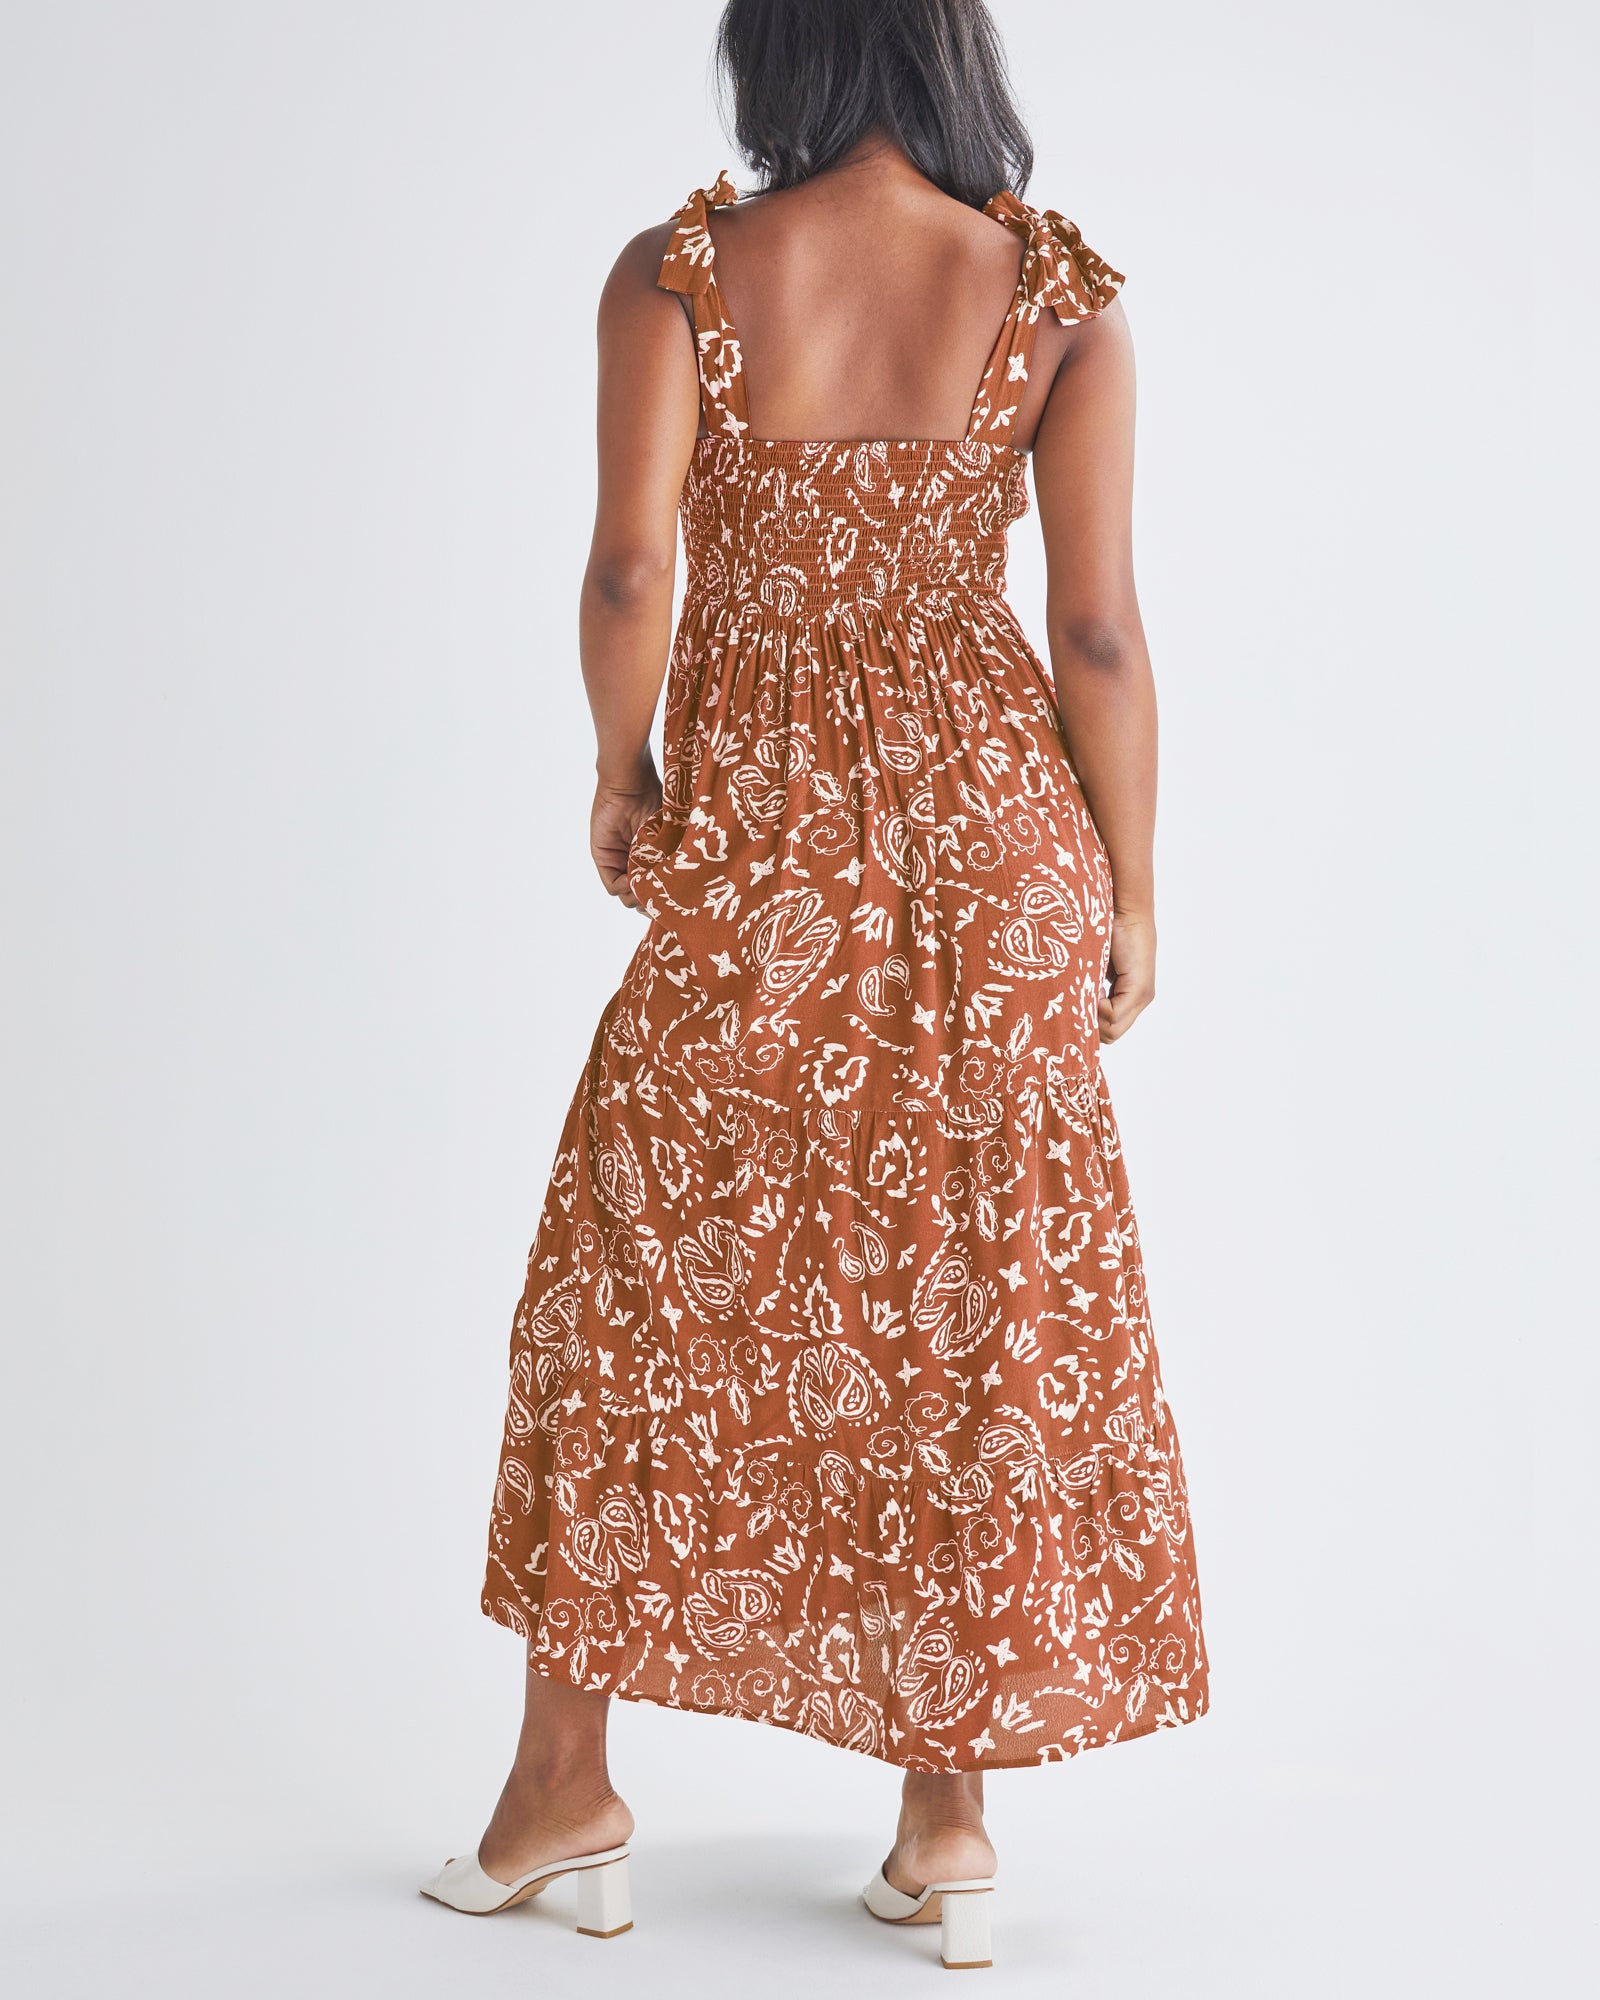 Back View - A pregnant Woman Wearing Maternity Maxi Dress in Brown Paisley Print from Angel Maternity